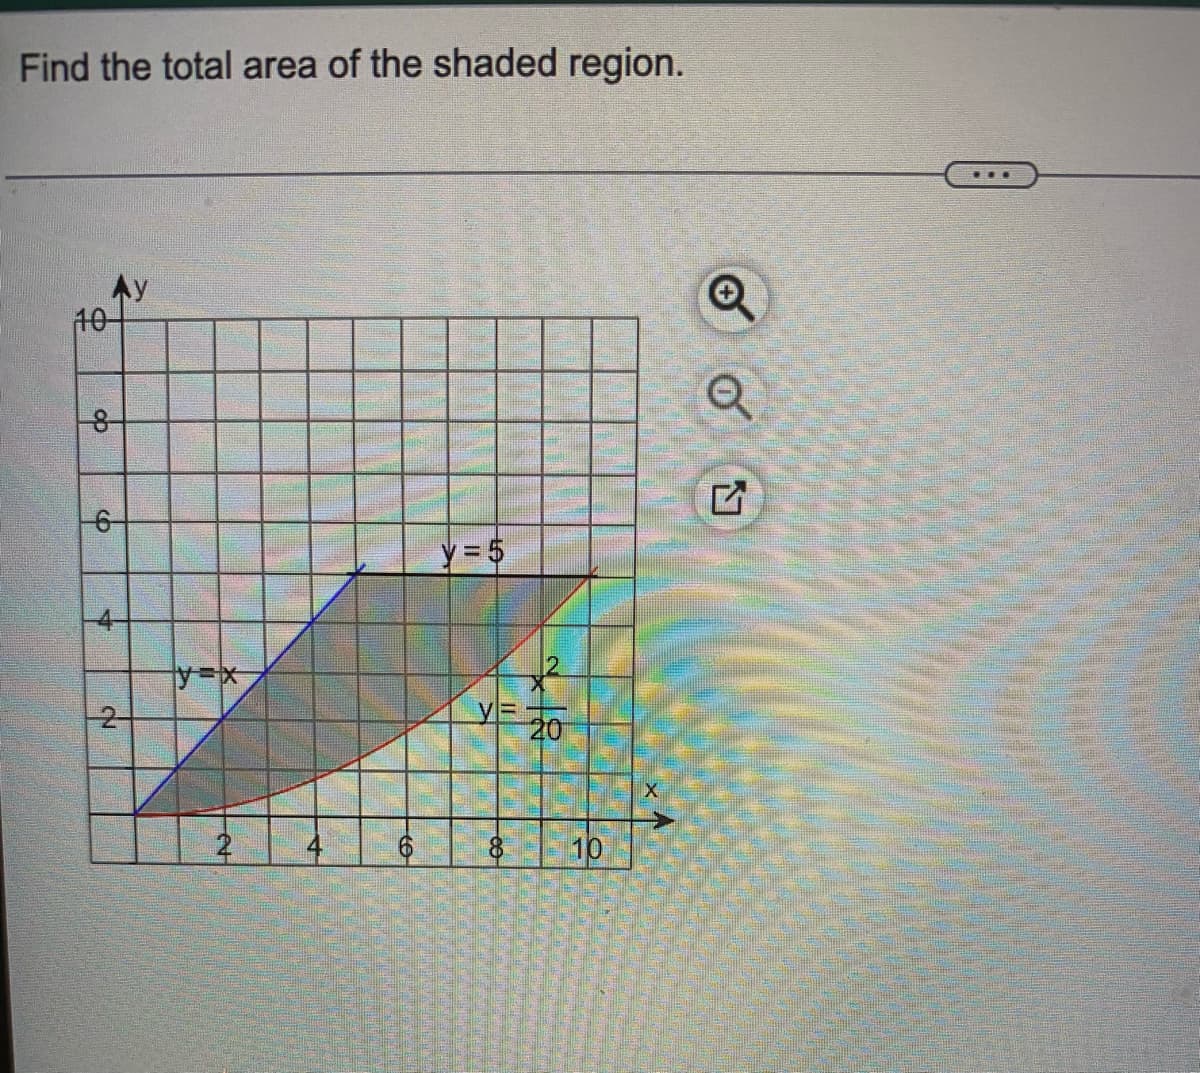 Find the total area of the shaded region.
Ay
10
-6-
y = 5
y%3Dx
-2-
10
